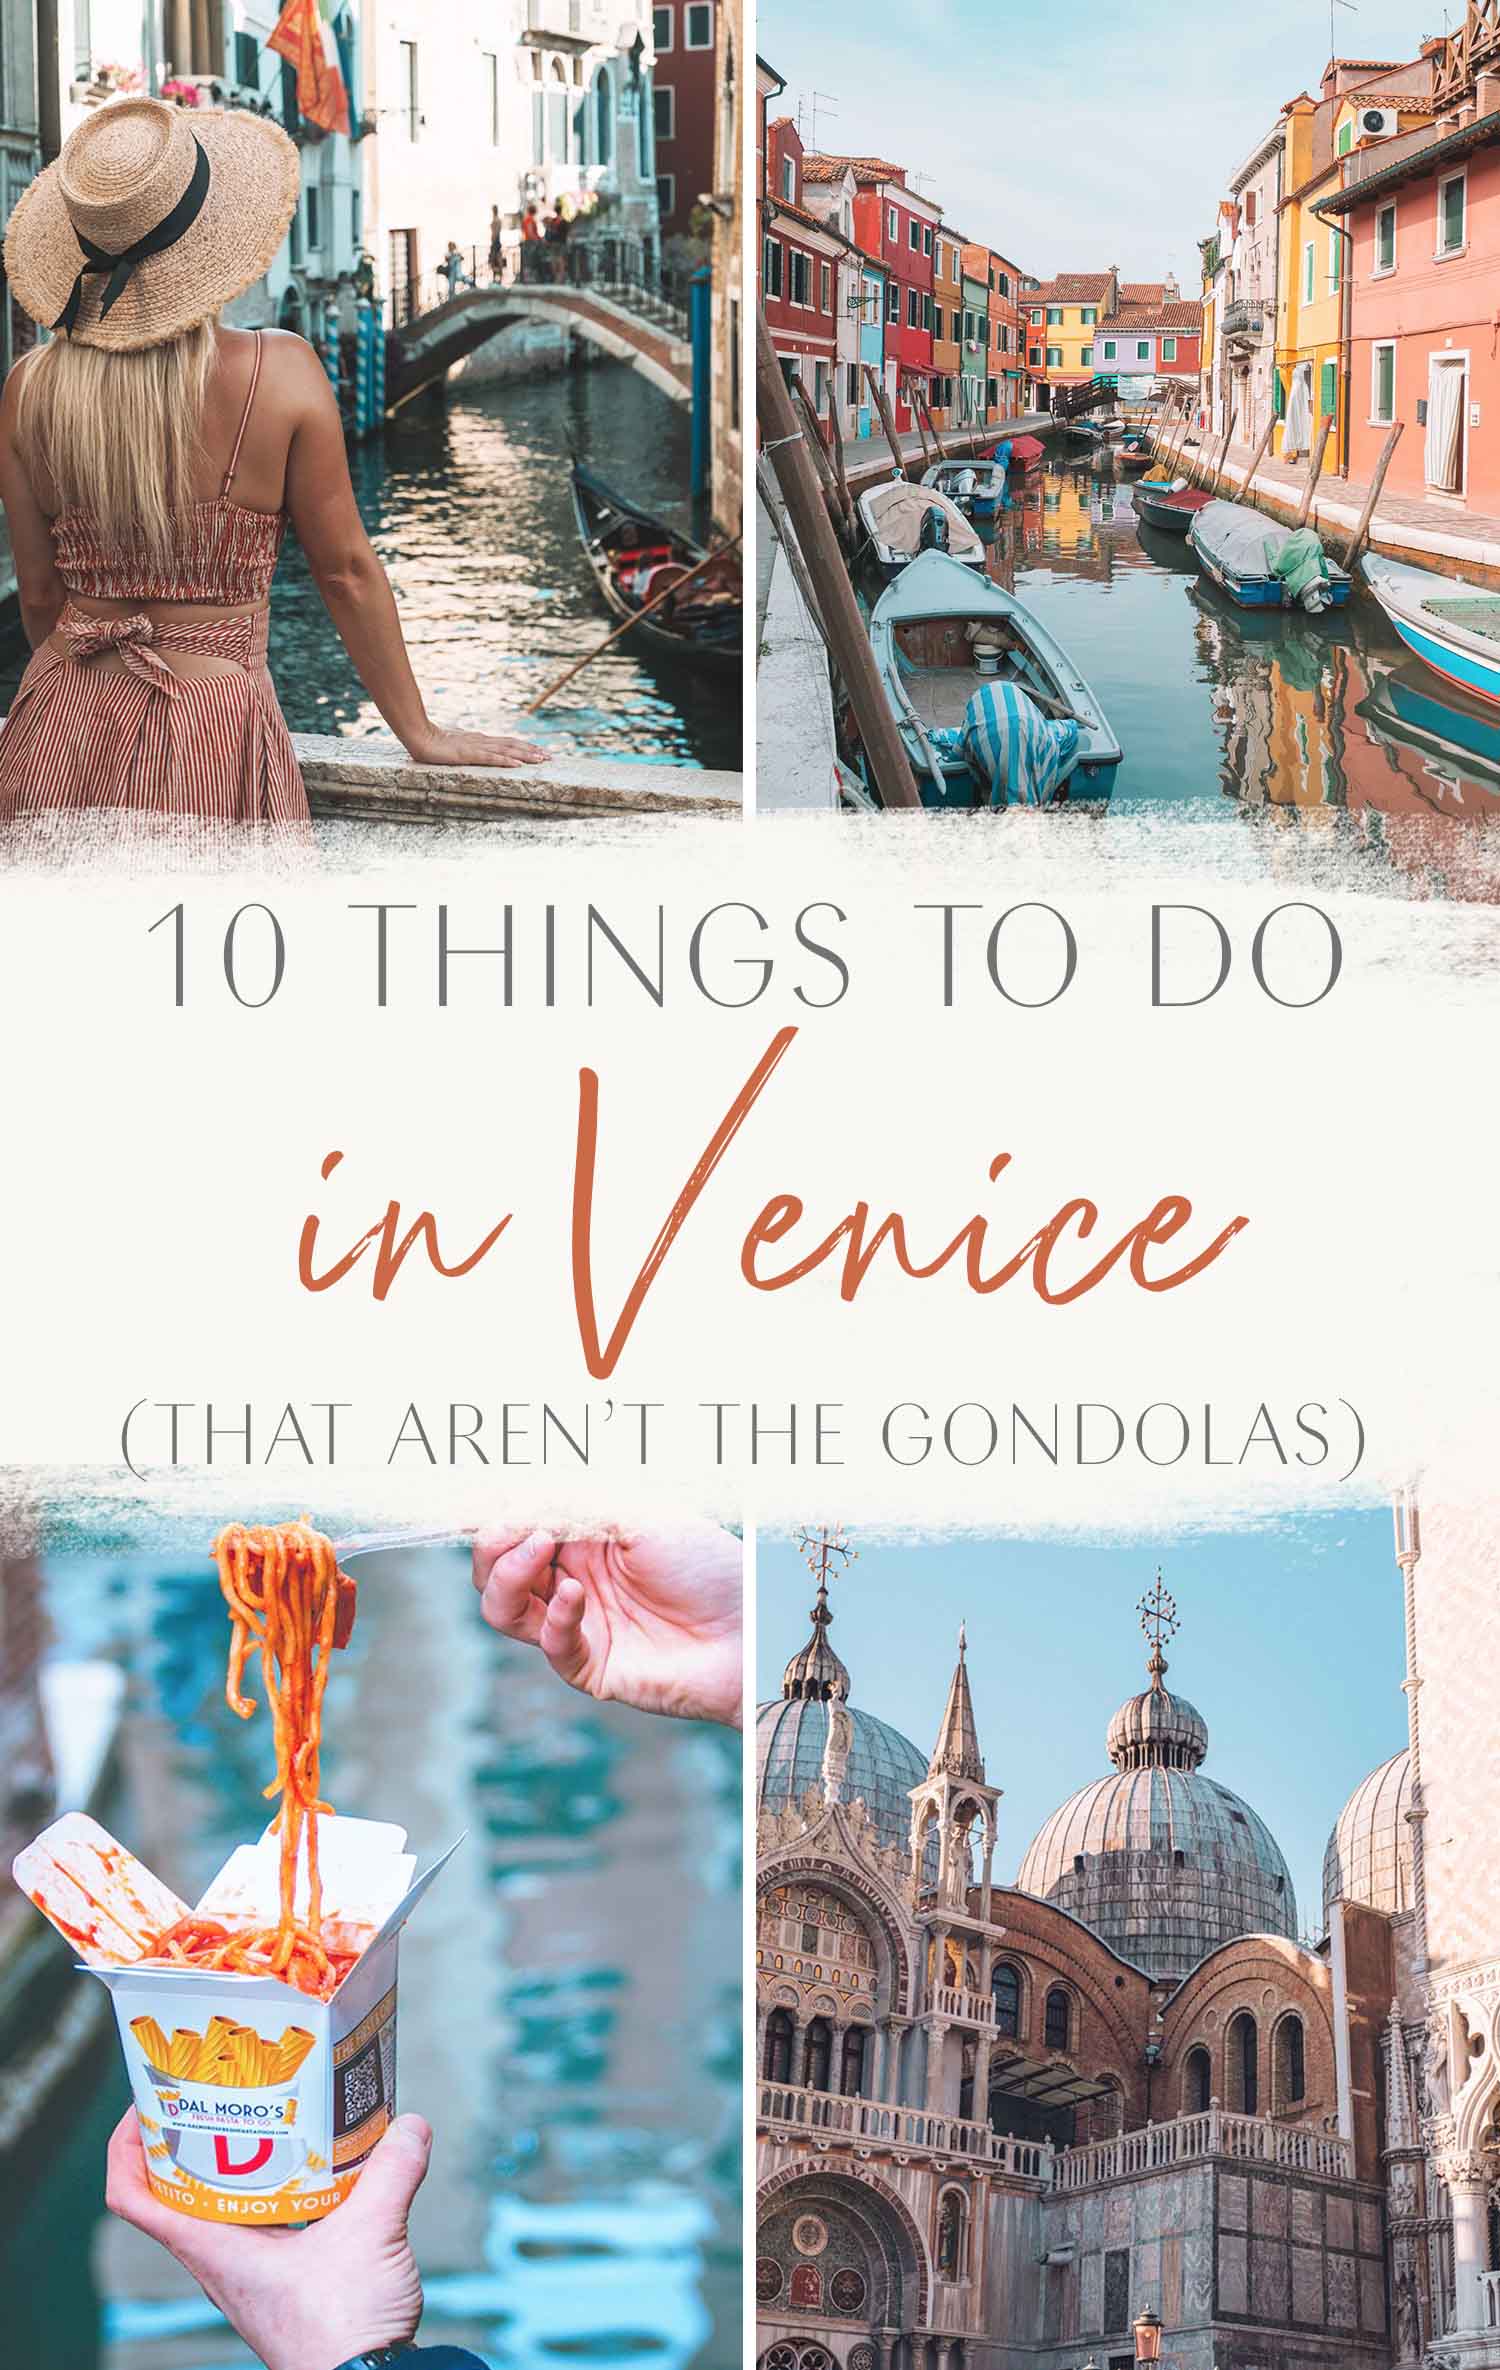 10 Things to Do in Venice